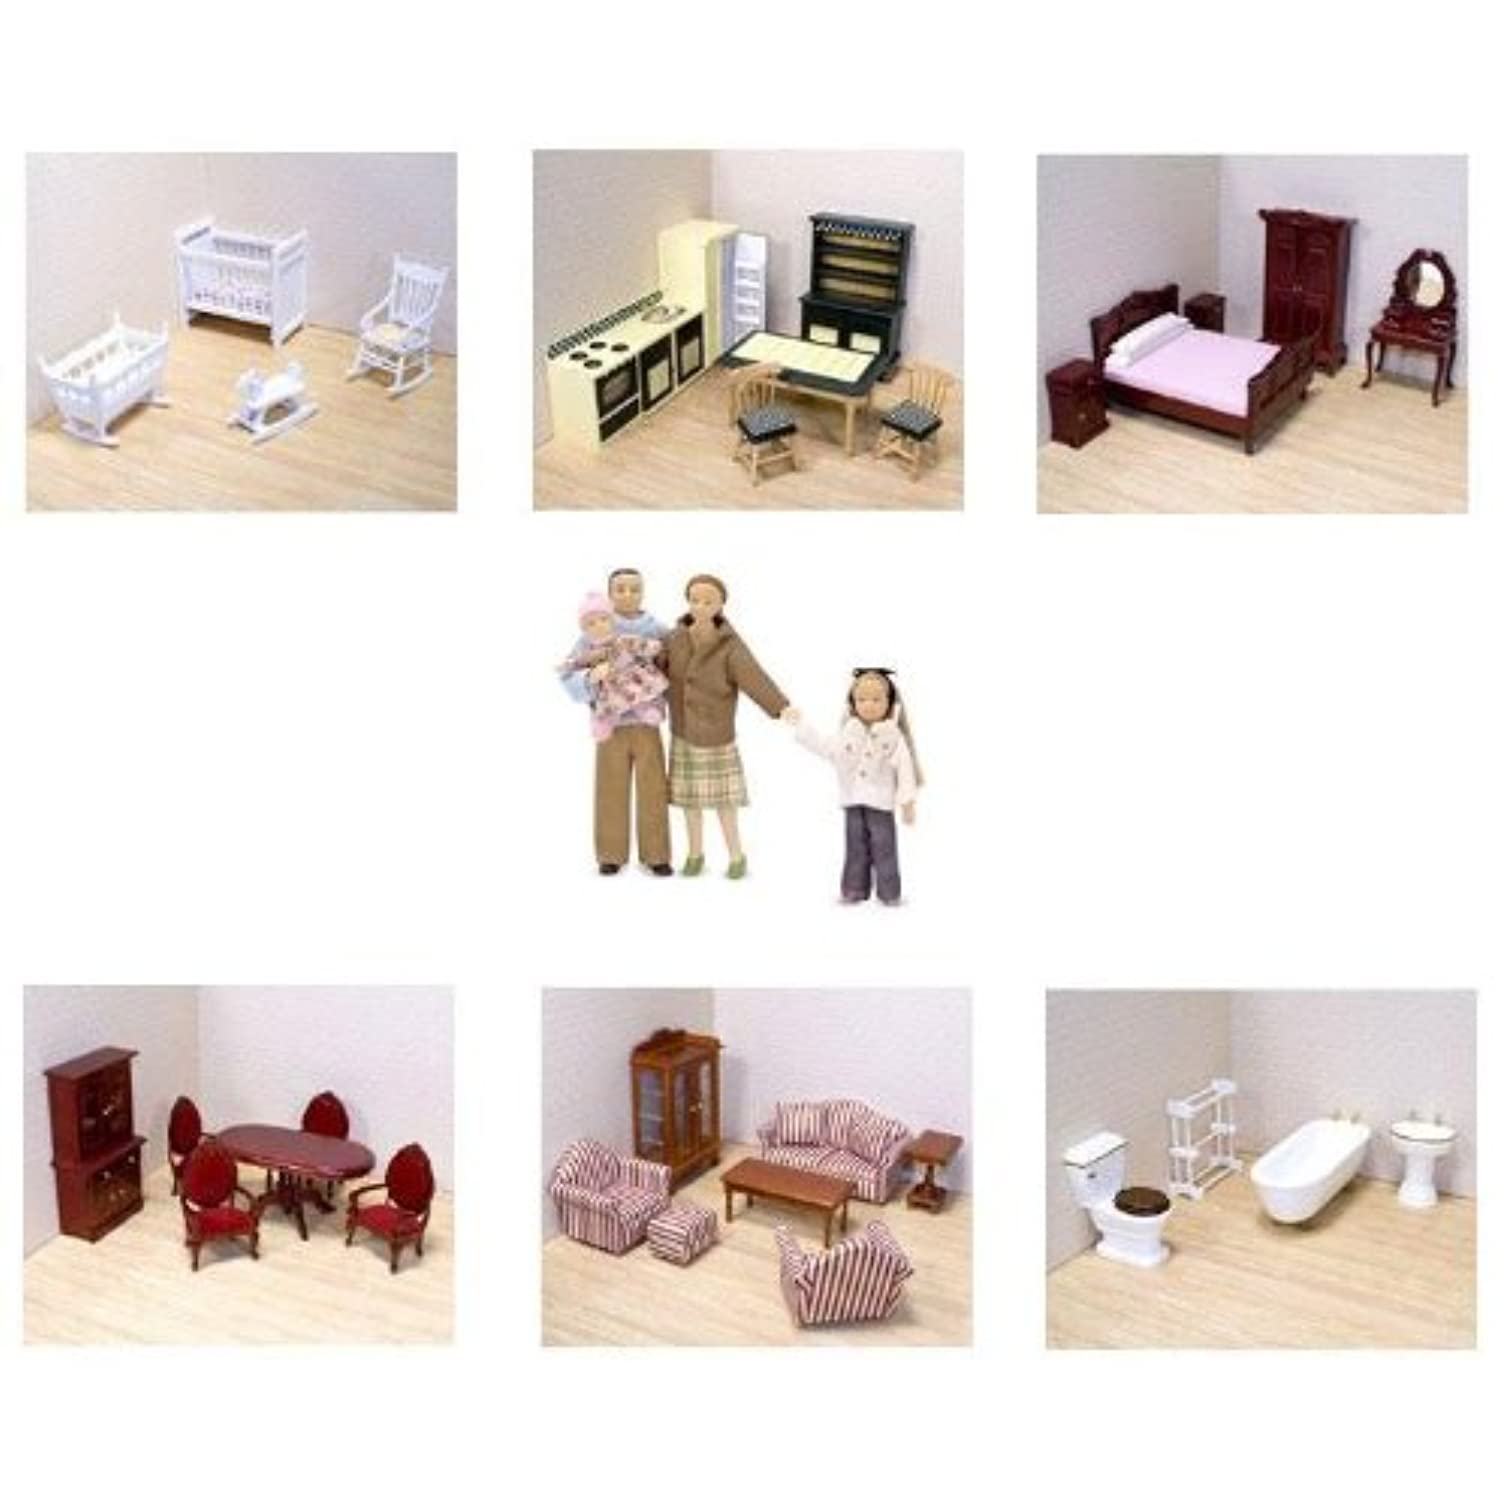 Melissa & Doug Doll Family and Furniture Sets